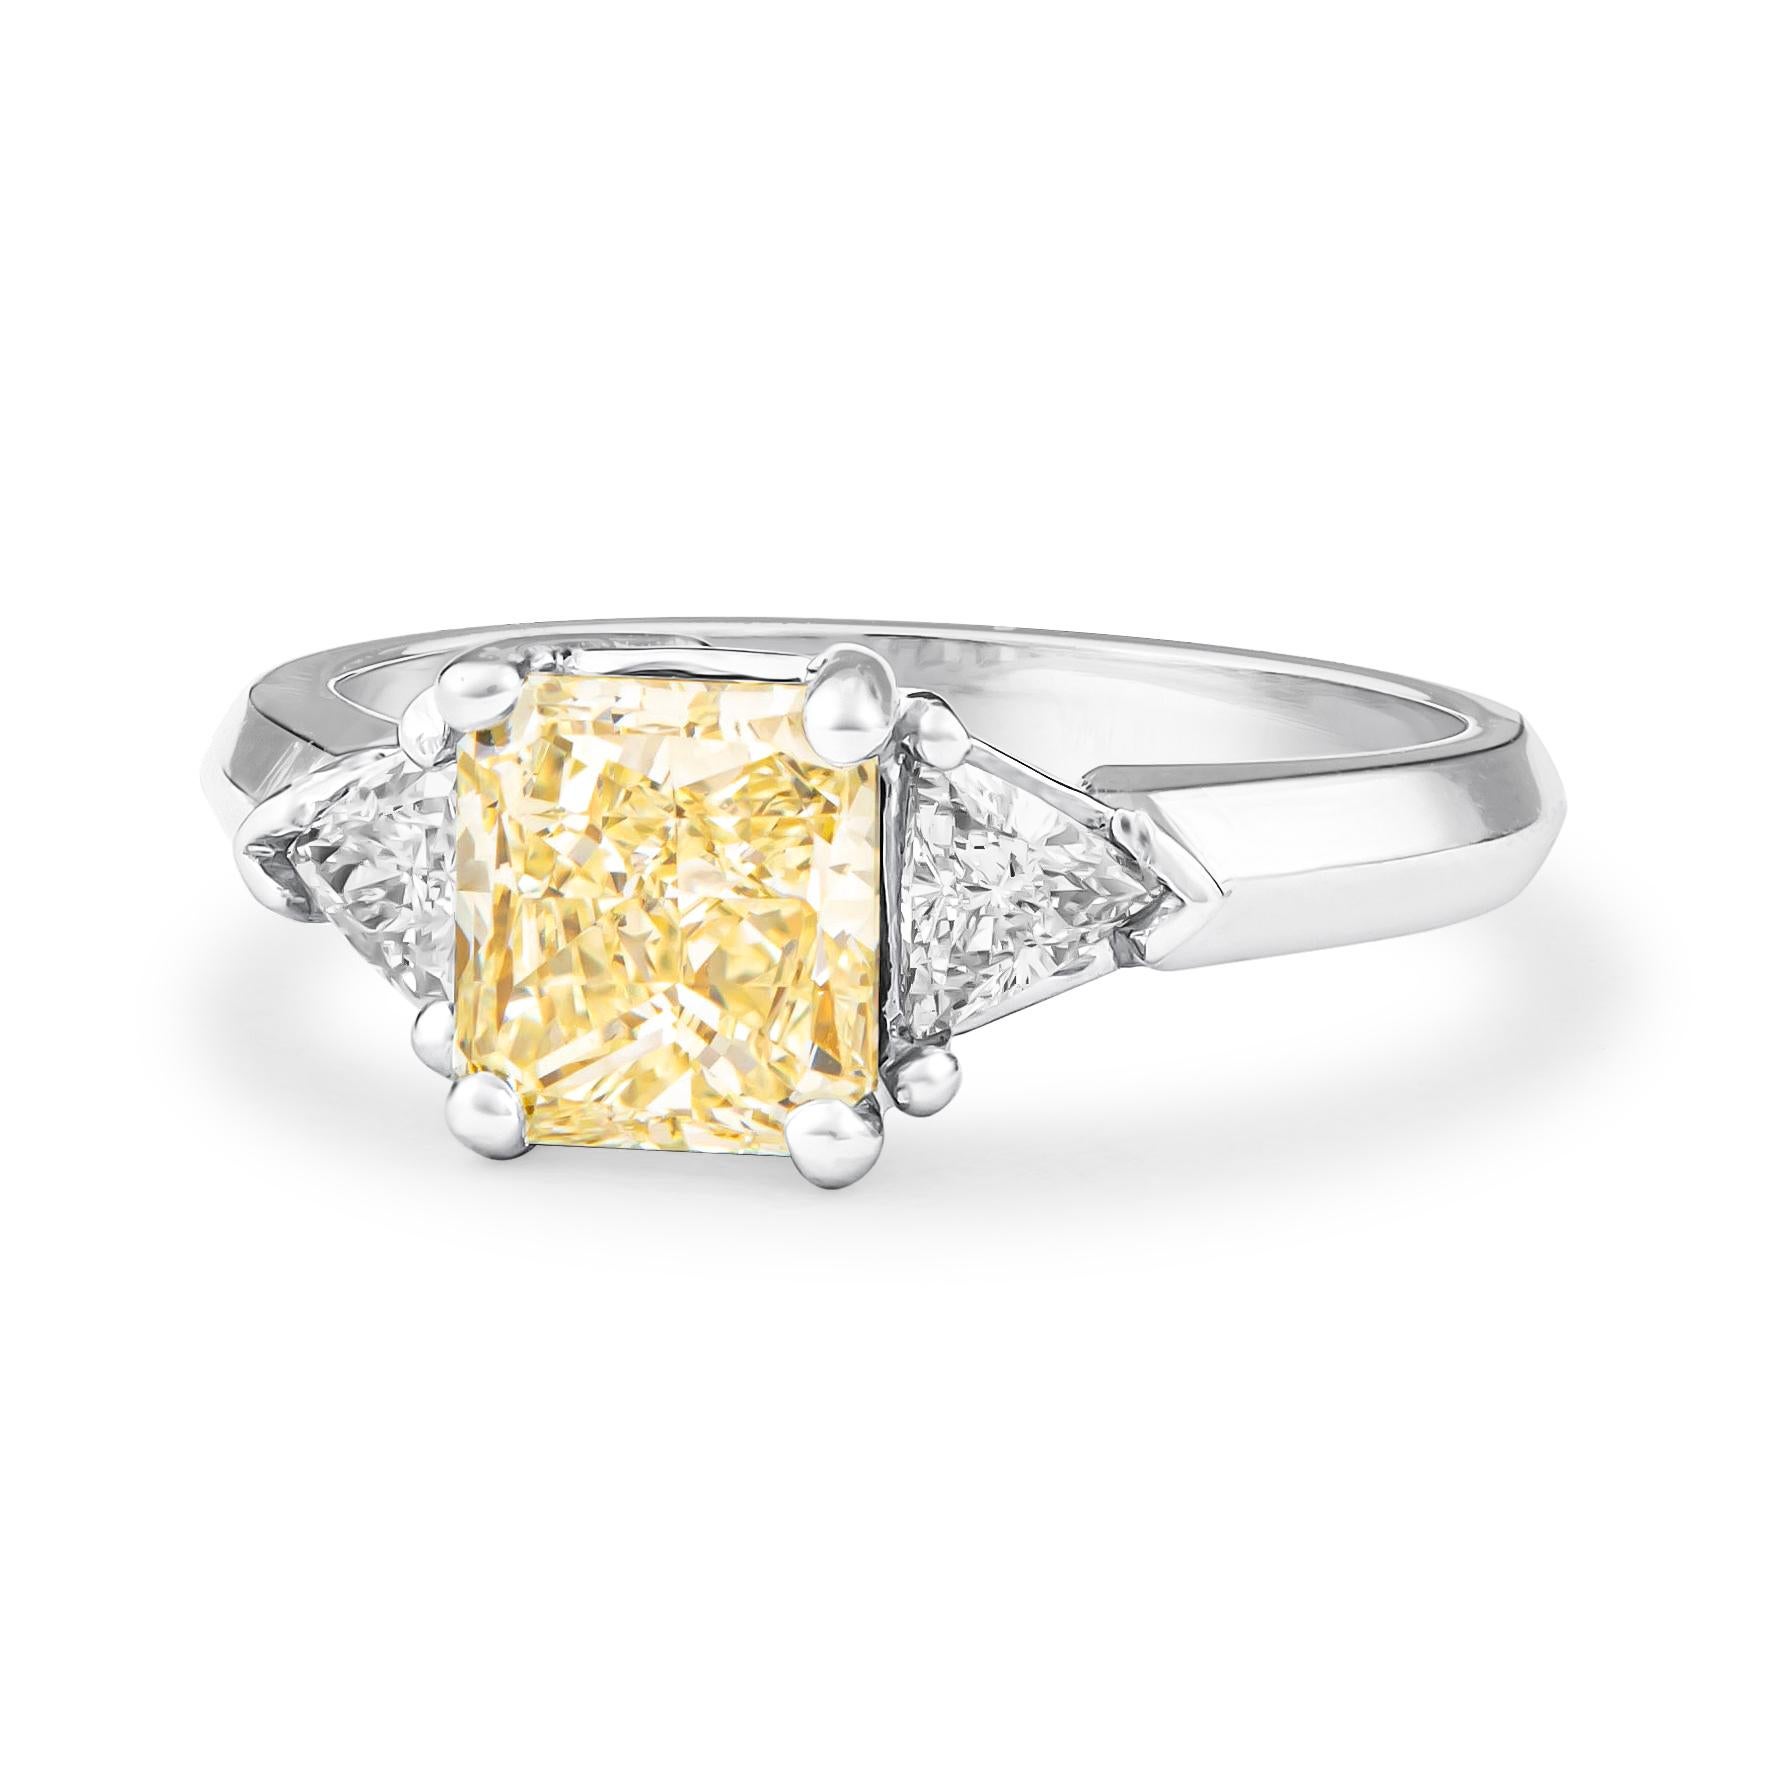 Captivating 3-stone diamond ring designed in 18K white gold that features one 1.80 carat total radiant diamond (Y-Z color, SI2 clarity) and 0.41 carats in two perfectly matched trillion diamonds. The ring was crafted in a size 7 and may be resized